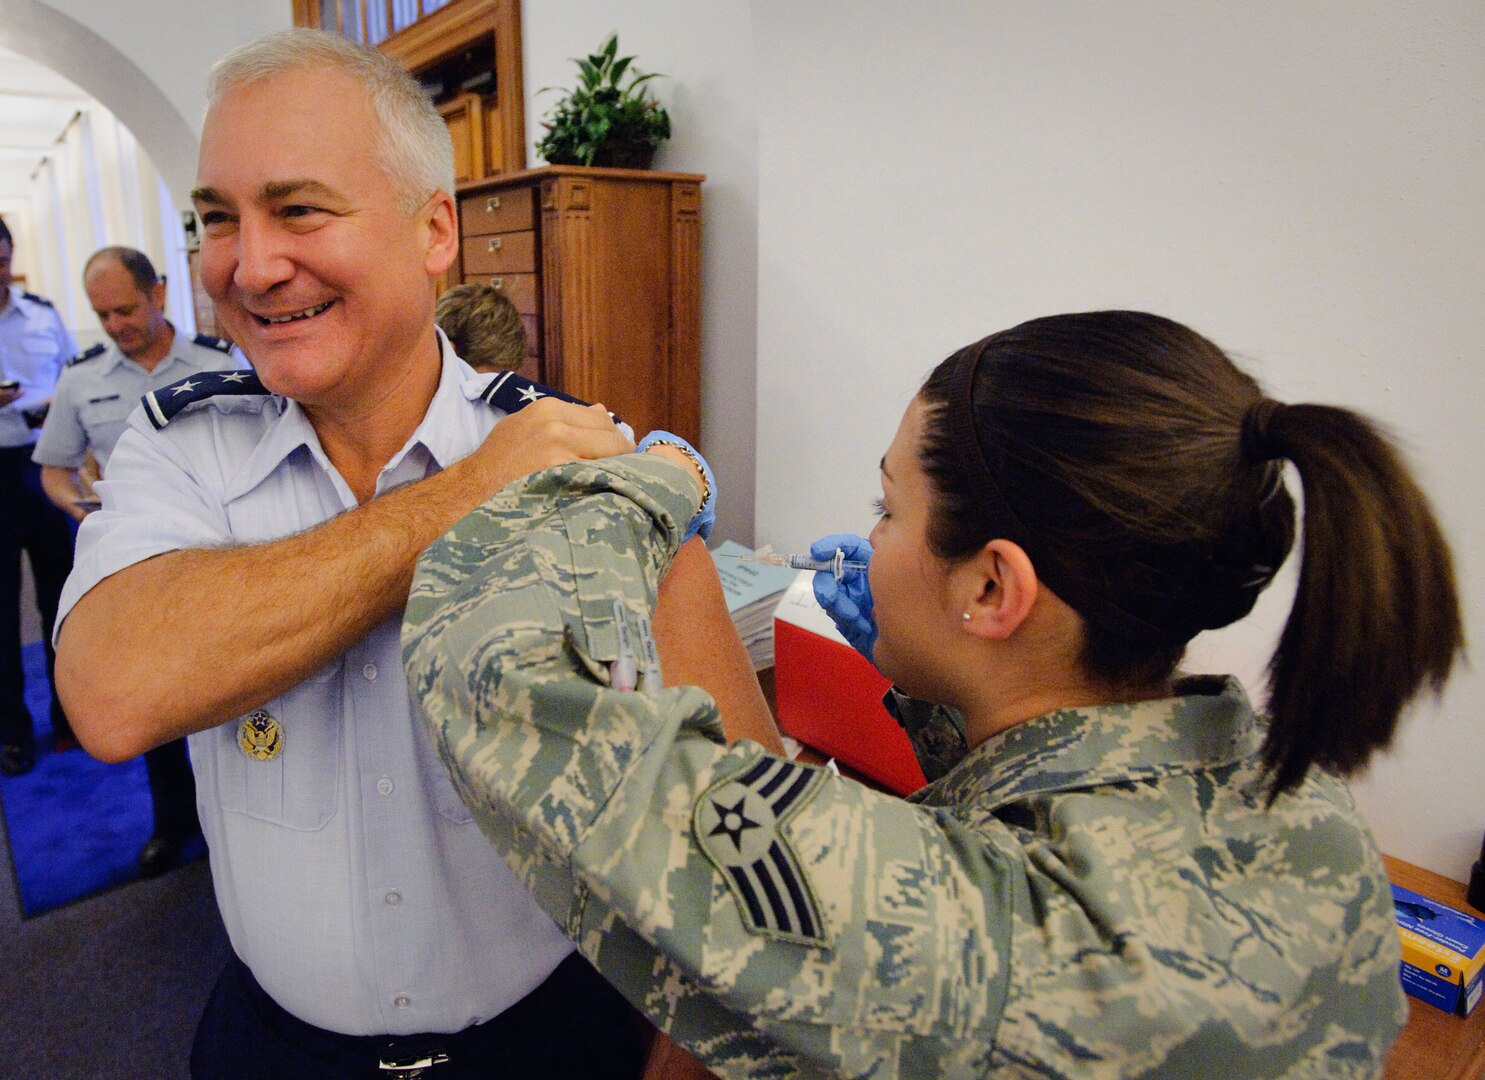 Maj. Gen. Erv Lessel, AETC Director of Plans, Requirements, Programs and Analysis receives his annual flu shot from Senior Airman April DeLuna of the 12th Medical Group at Randolph Air Force Base, Texas. (U.S. Air Force photo/Steve Thurow)